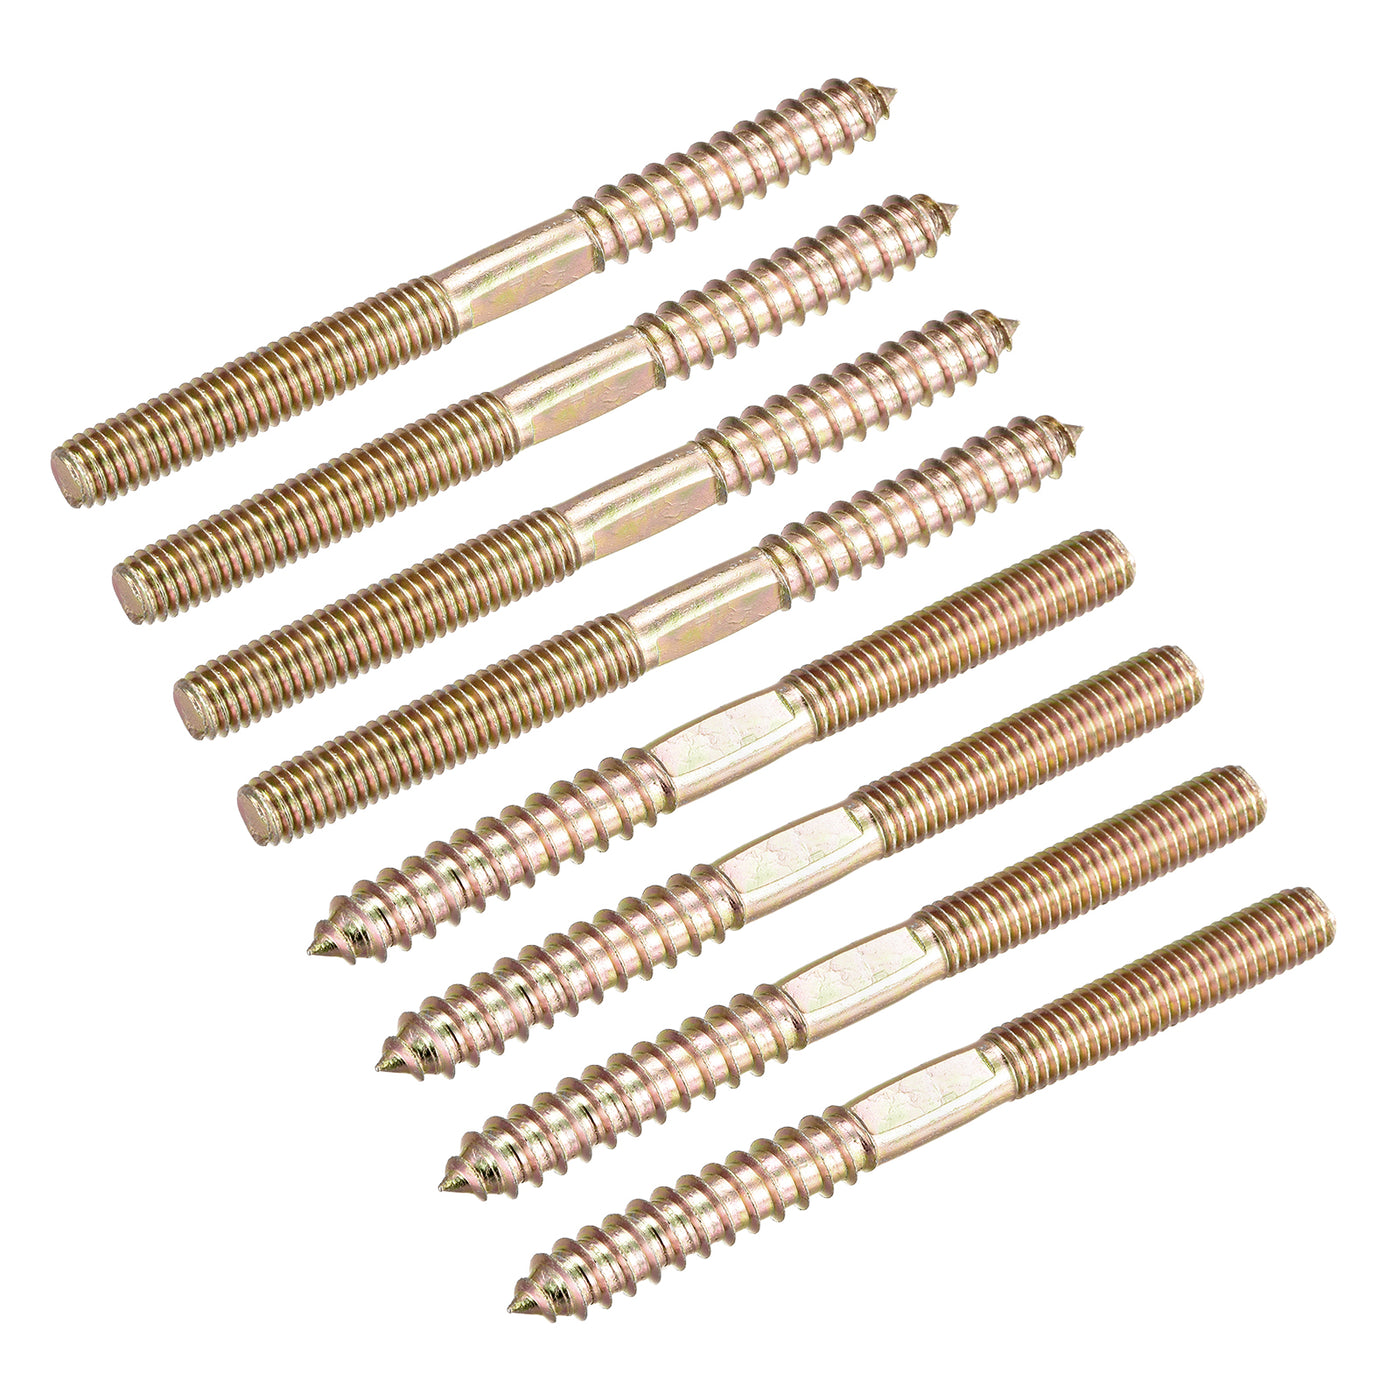 Uxcell Uxcell M10x100mm Hanger Bolts, 8pcs Double Head Thread Dowel Screws for Wood Furniture